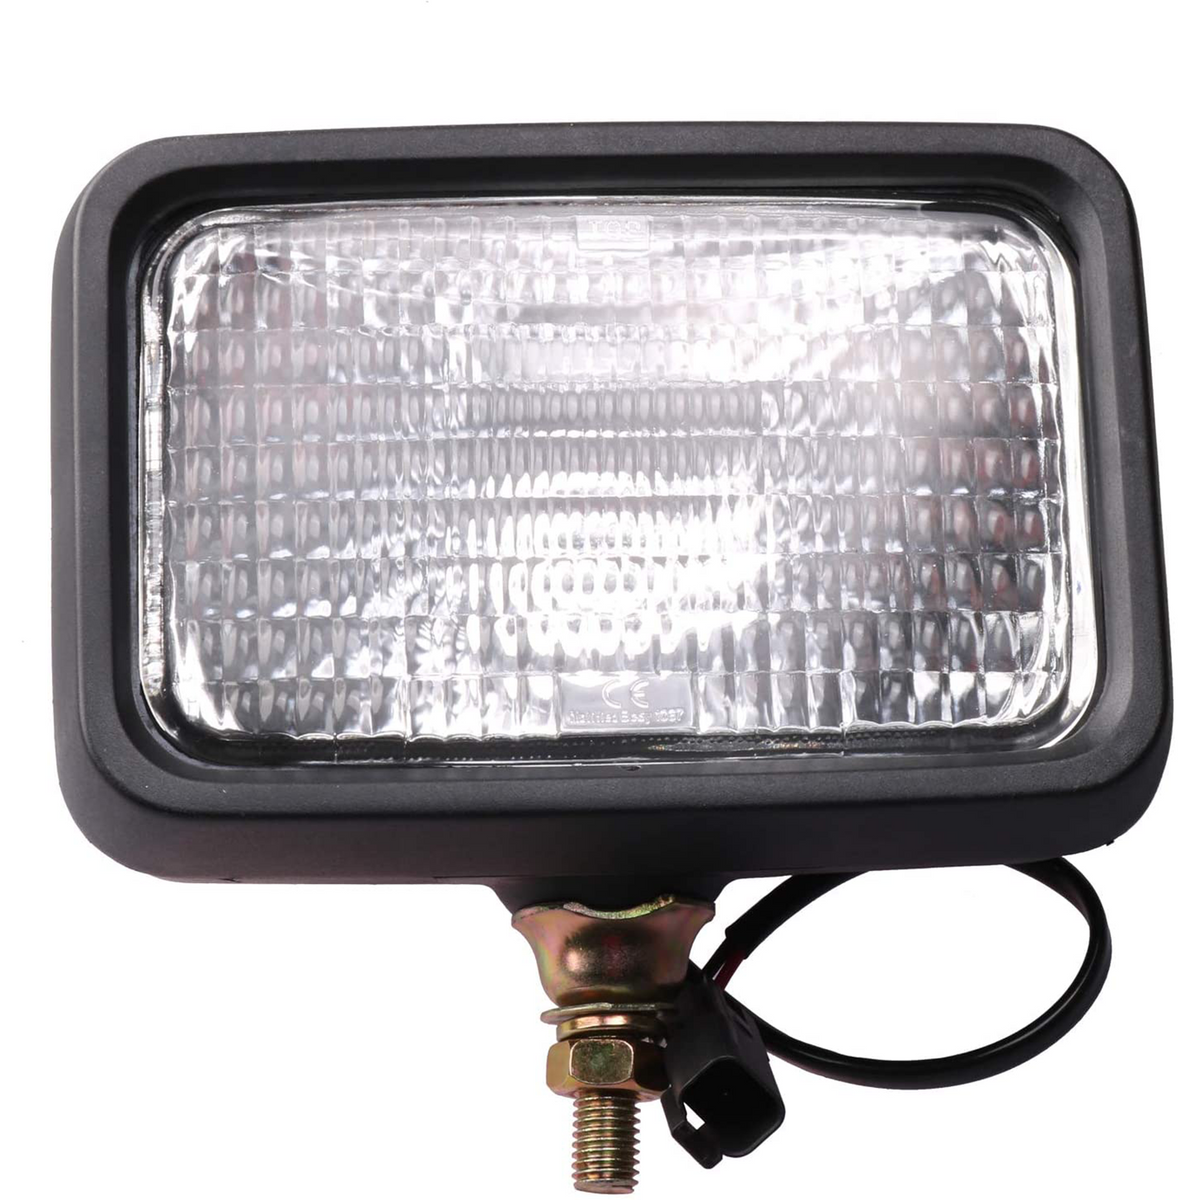 Work Lamp Ass'y 21T-06-32810 Fit for Komatsu PC300-8 PC350-8 PC300-8 PC300LC-8 PC350LC-8 PC130-8 PC400LC-8 PC400LC-8R PC450-8R PC450-8 PC160LC-8 PC2000-8 Excavator - KUDUPARTS